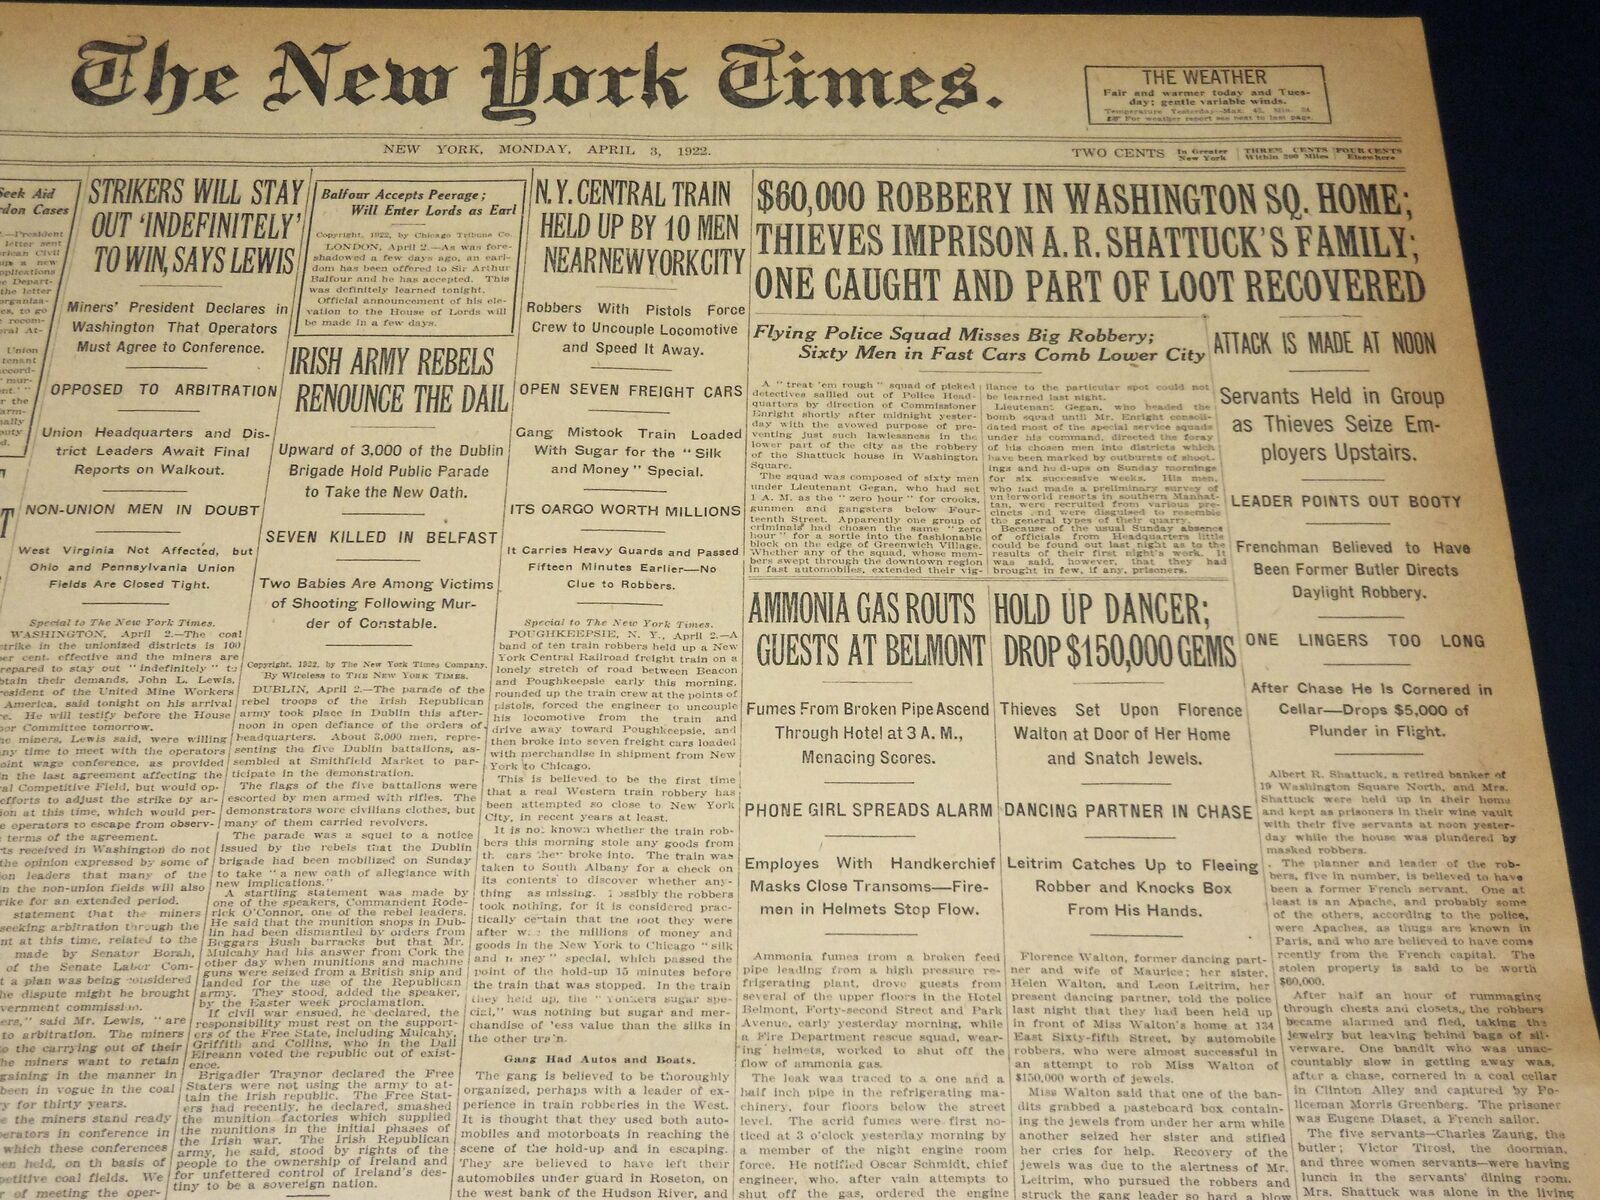 1922 APRIL 3 NEW YORK TIMES - $60,000 ROBBERY AT HOME OF A. R. SHATTUCK- NT 8574